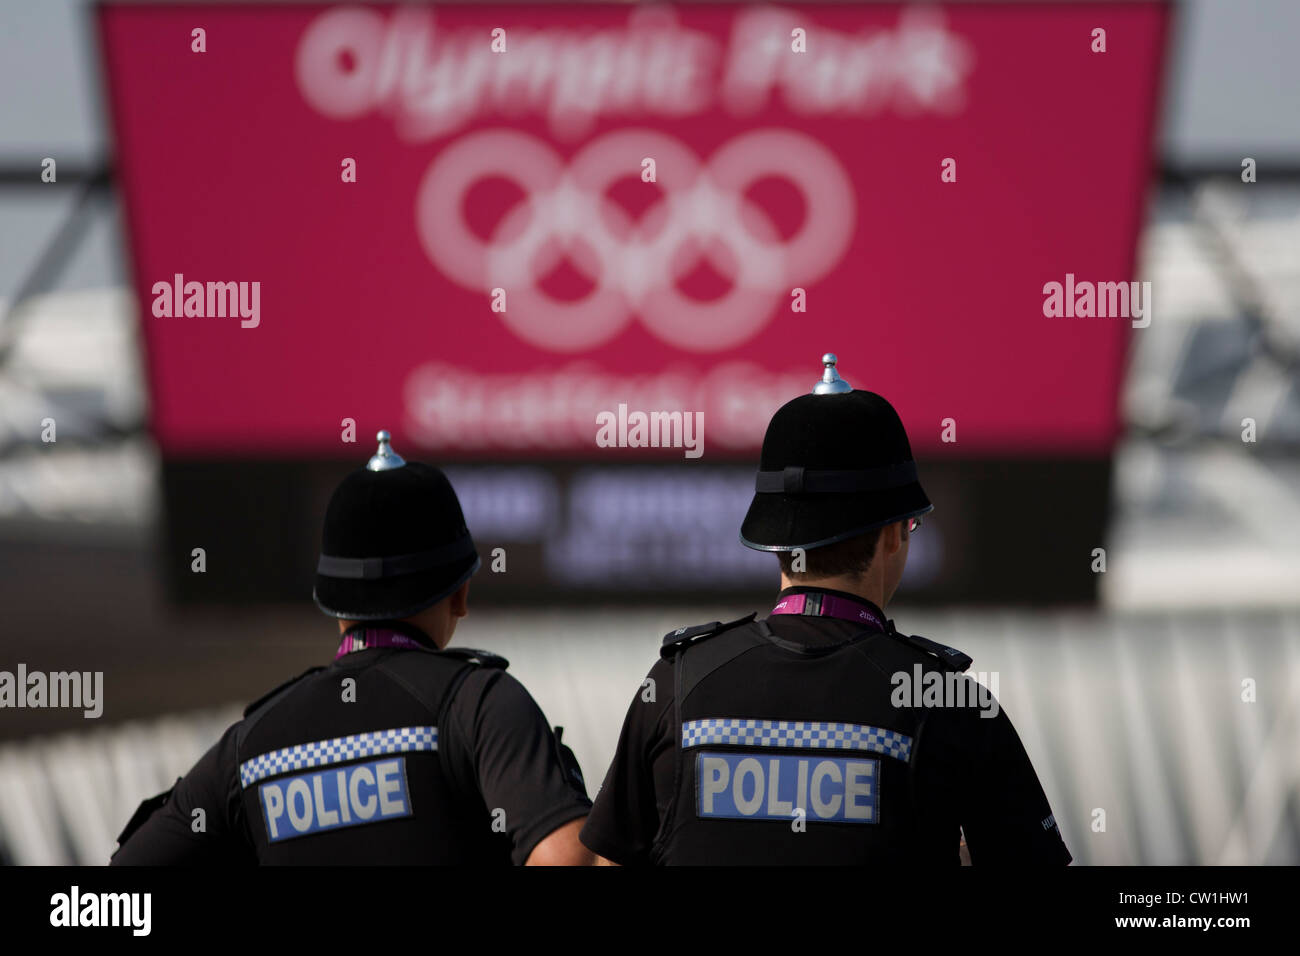 Police officers from Humberside in the North east of England stand in front of the main entrance to the Olympic Park as a visible presence during the London 2012 Olympics. More than 230 officers from across the Humber region travelled to London to help police the Olympic Games. Holidays were restricted, training reduced and special constables drafted in to provide cover in Hull and the East Riding as officers were sent to London to police the city while the Games are on. Senior officers say they have been working hard to ensure 'core policing' across Hull and the East Riding is not weakened. Stock Photo